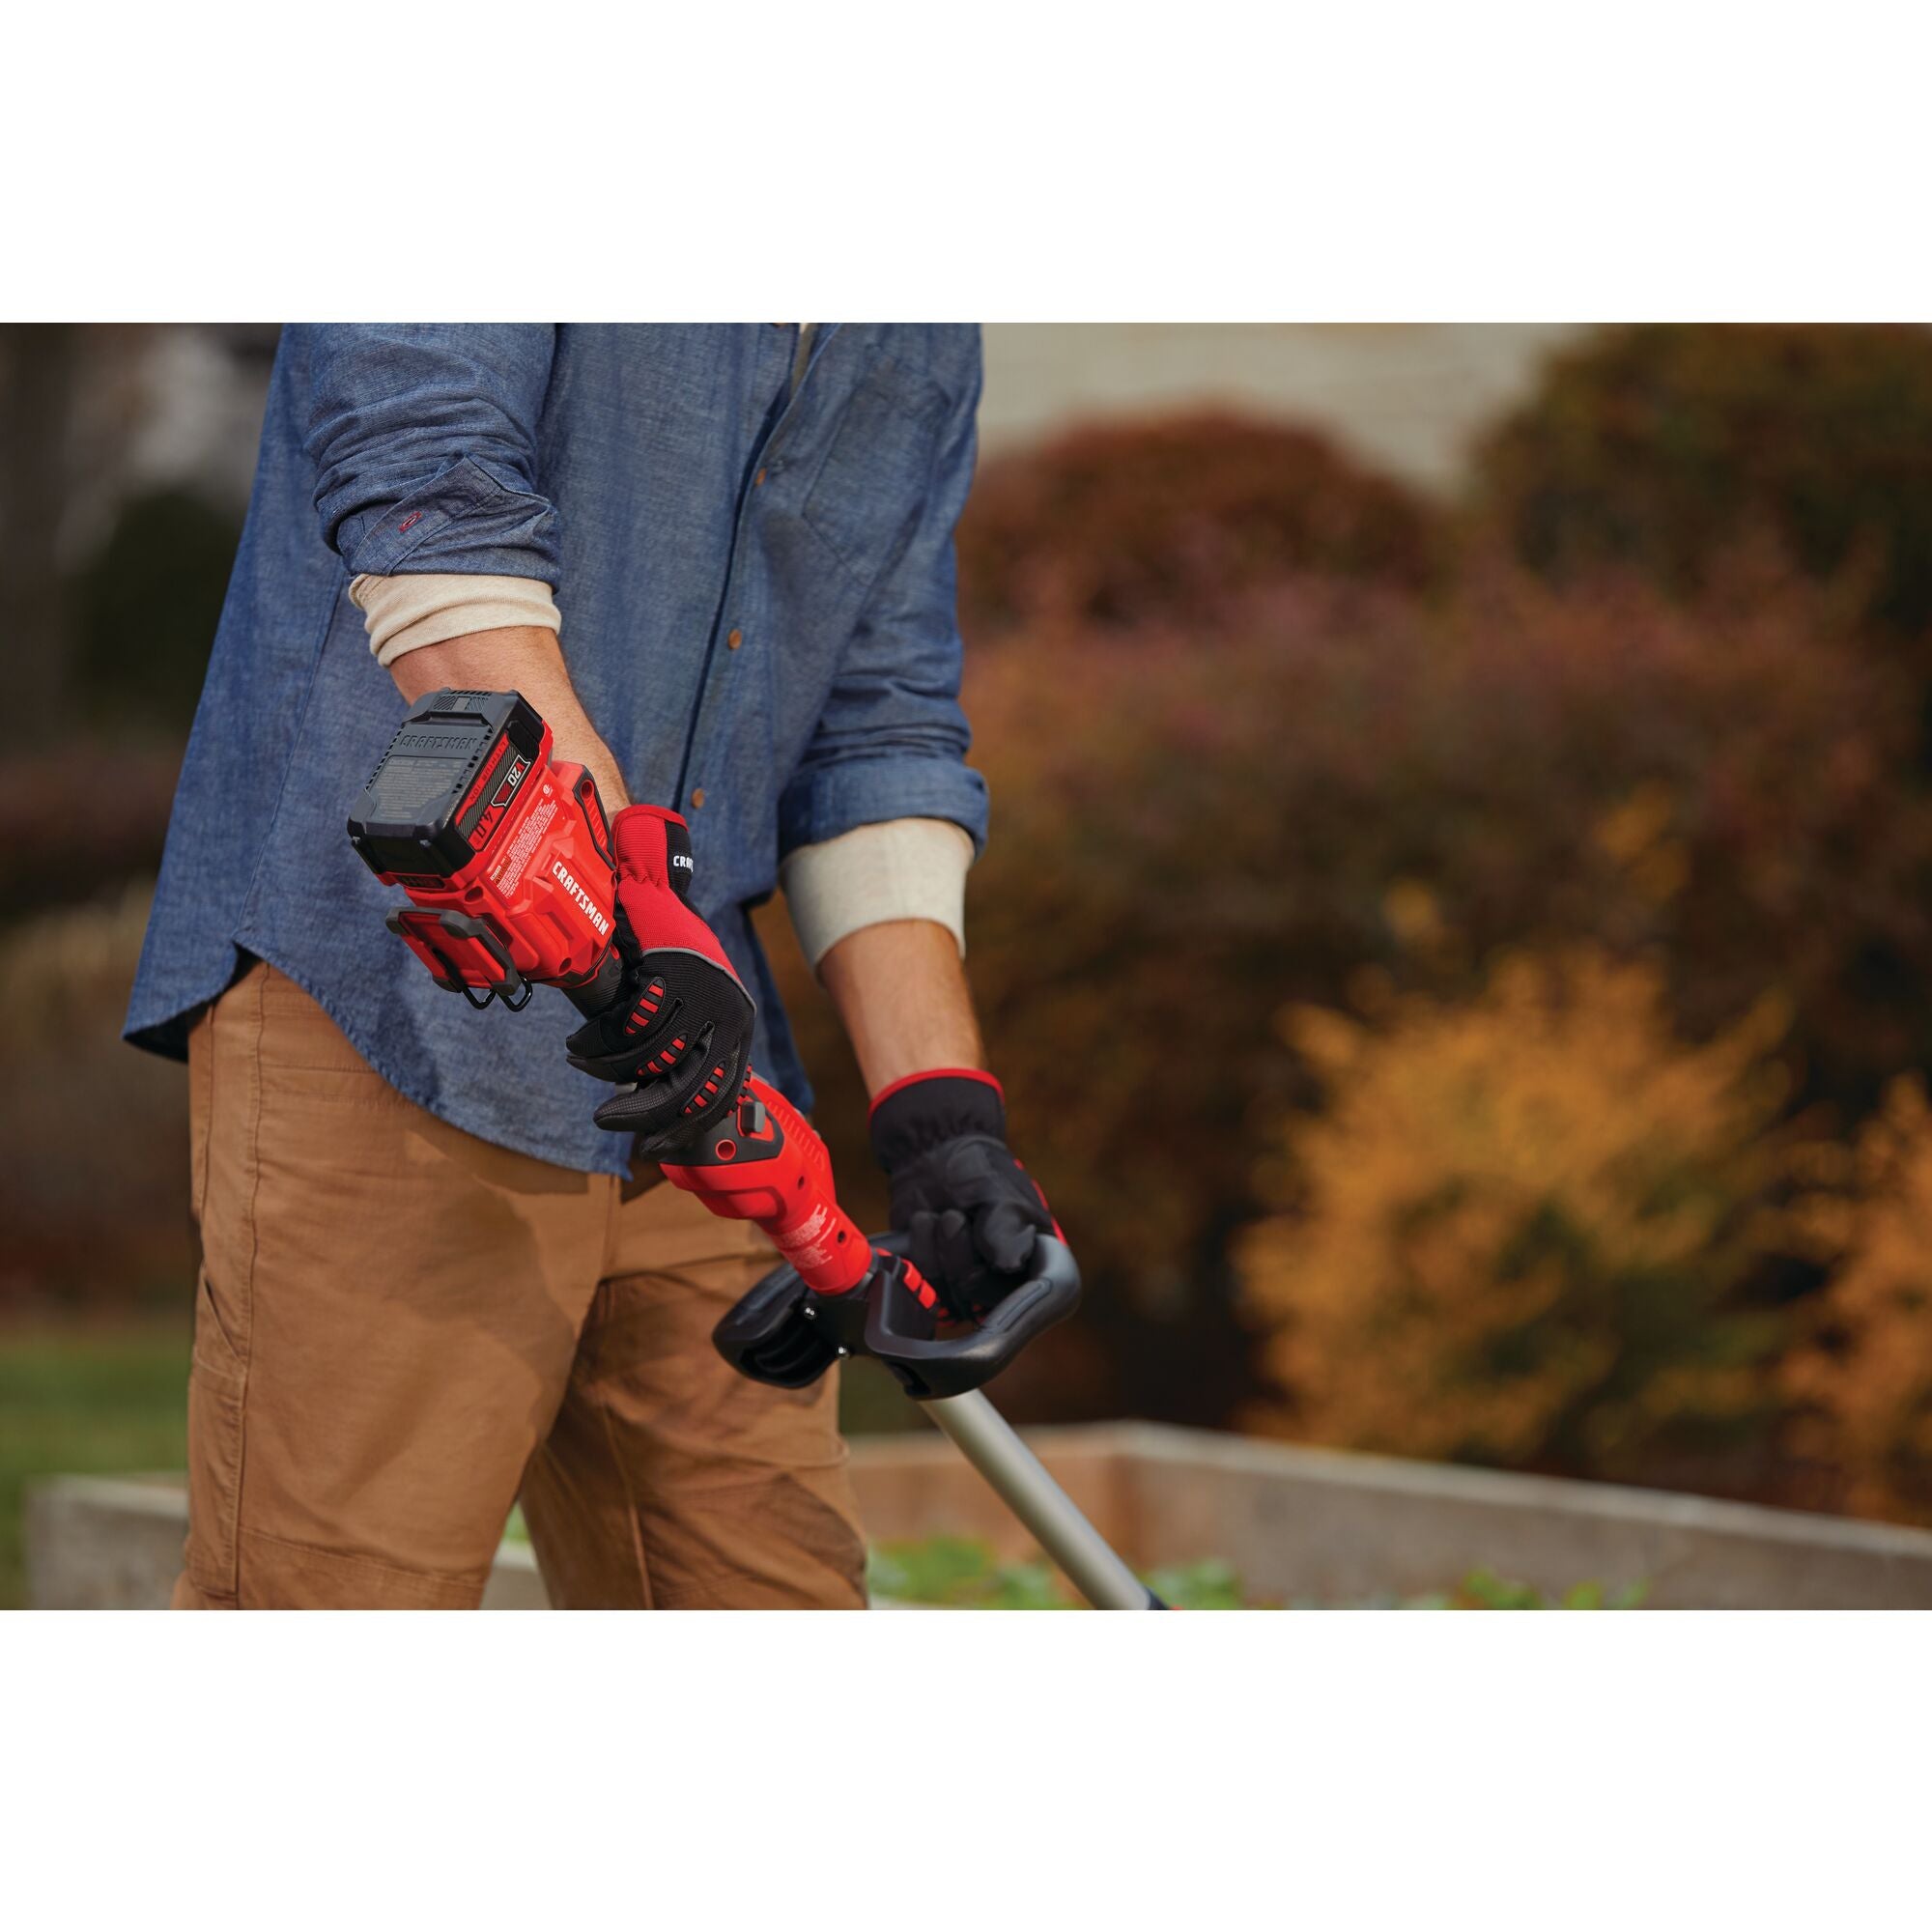 40-Volt Lithium-Ion Cordless Battery String Trimmer/Edger (Tool